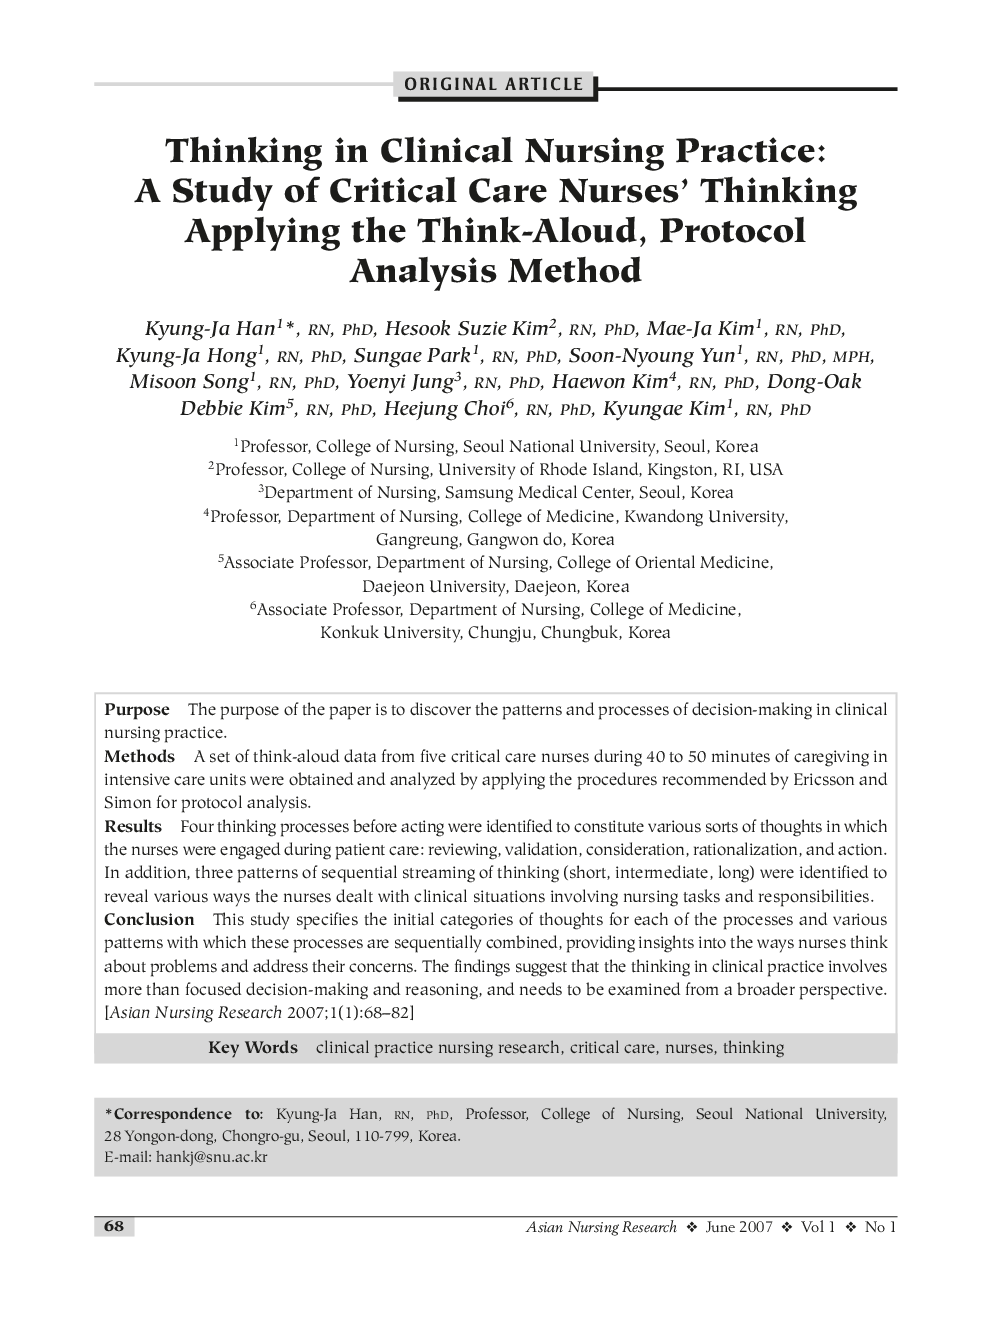 Thinking in Clinical Nursing Practice: A Study of Critical Care Nurses' Thinking Applying the Think-Aloud, Protocol Analysis Method